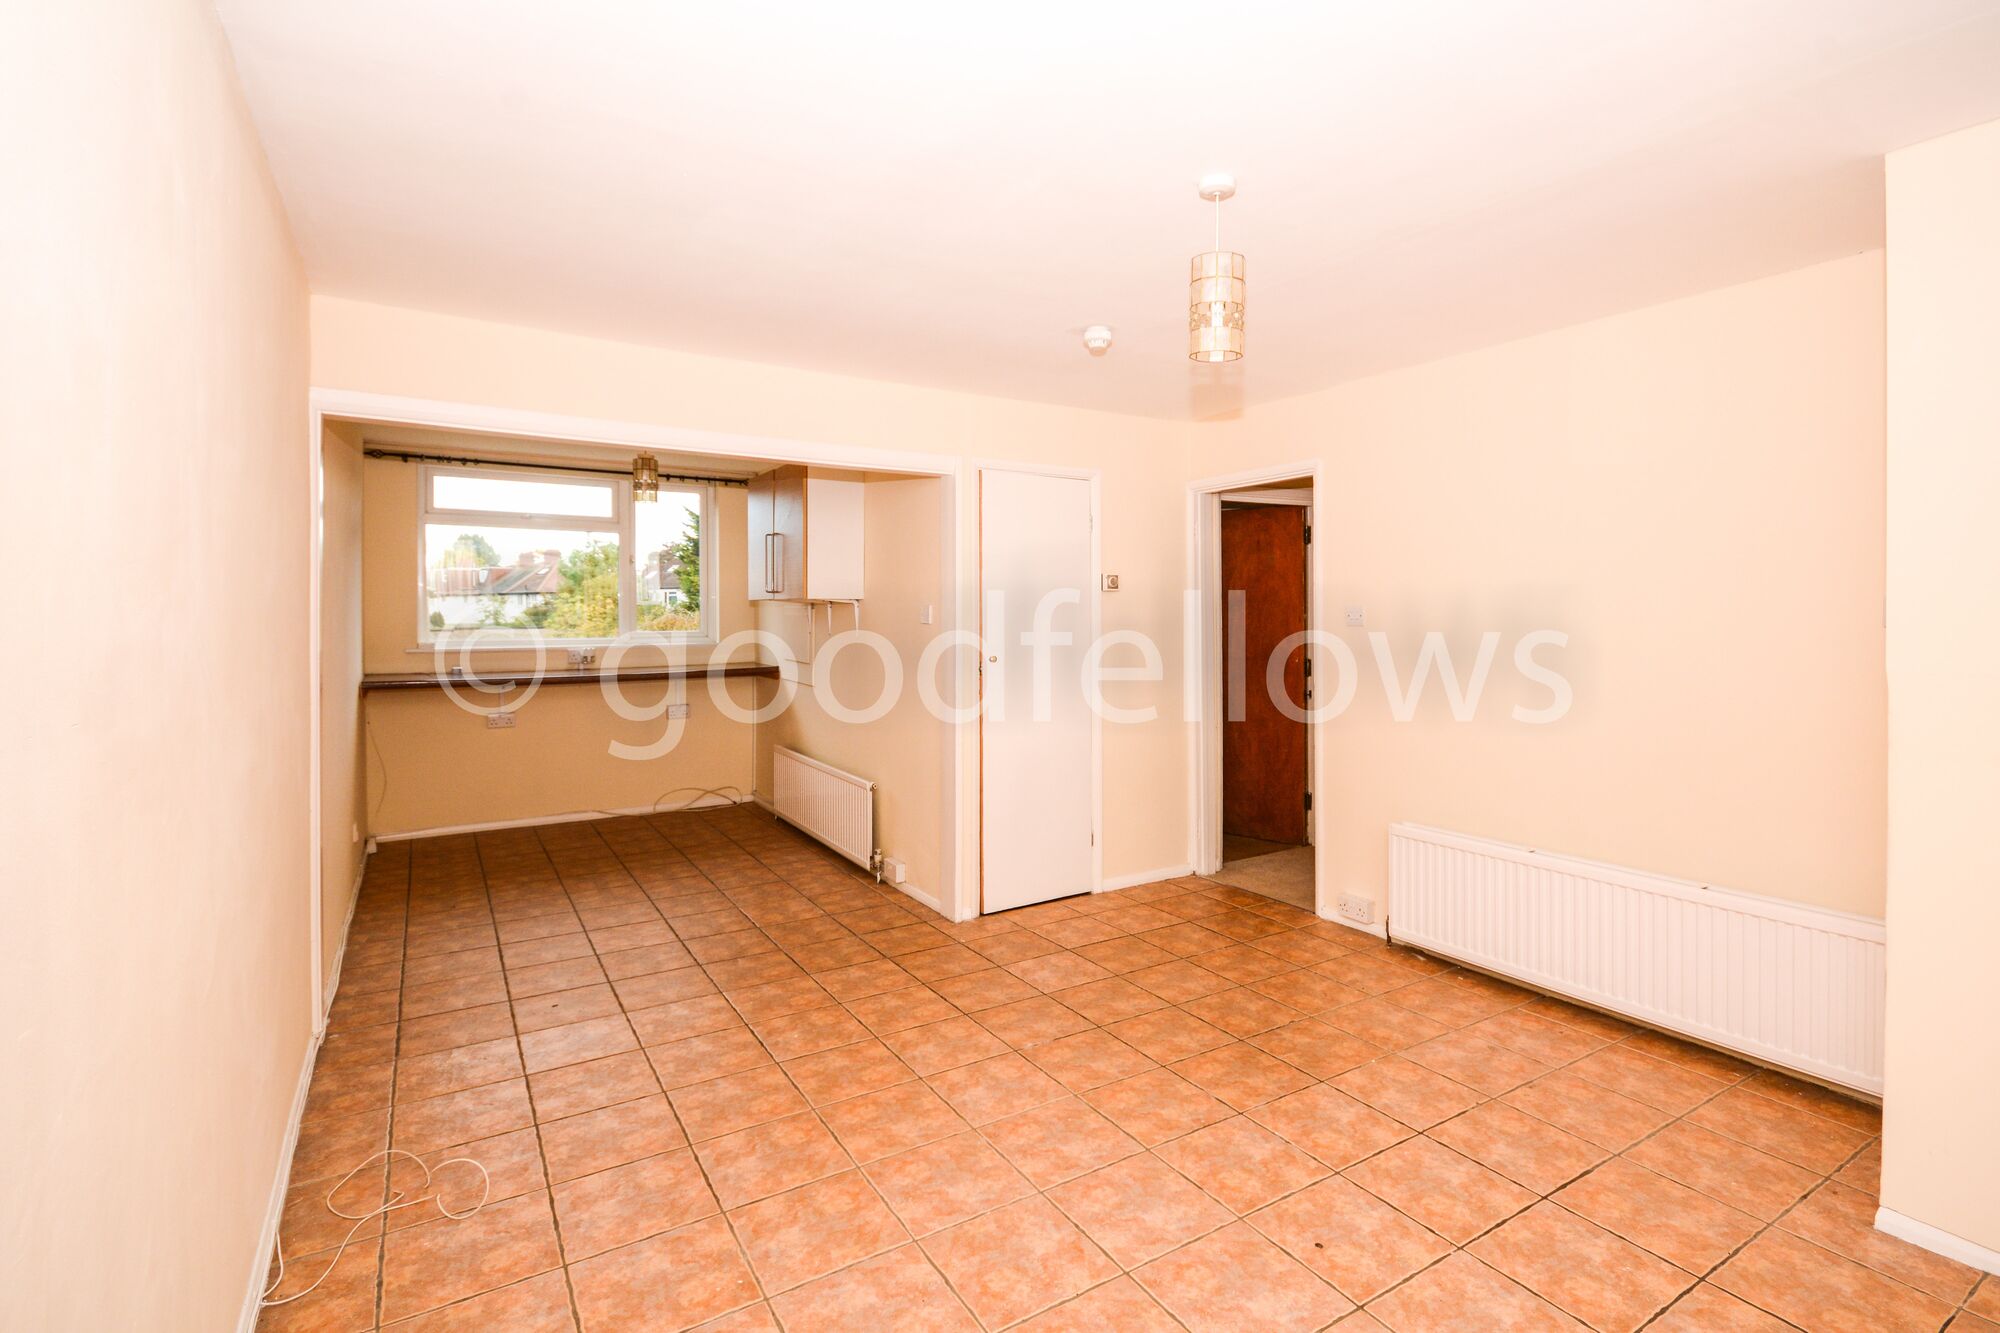 4 bedroom  house to rent, Available now Gloucester Gardens, Sutton, SM1, main image